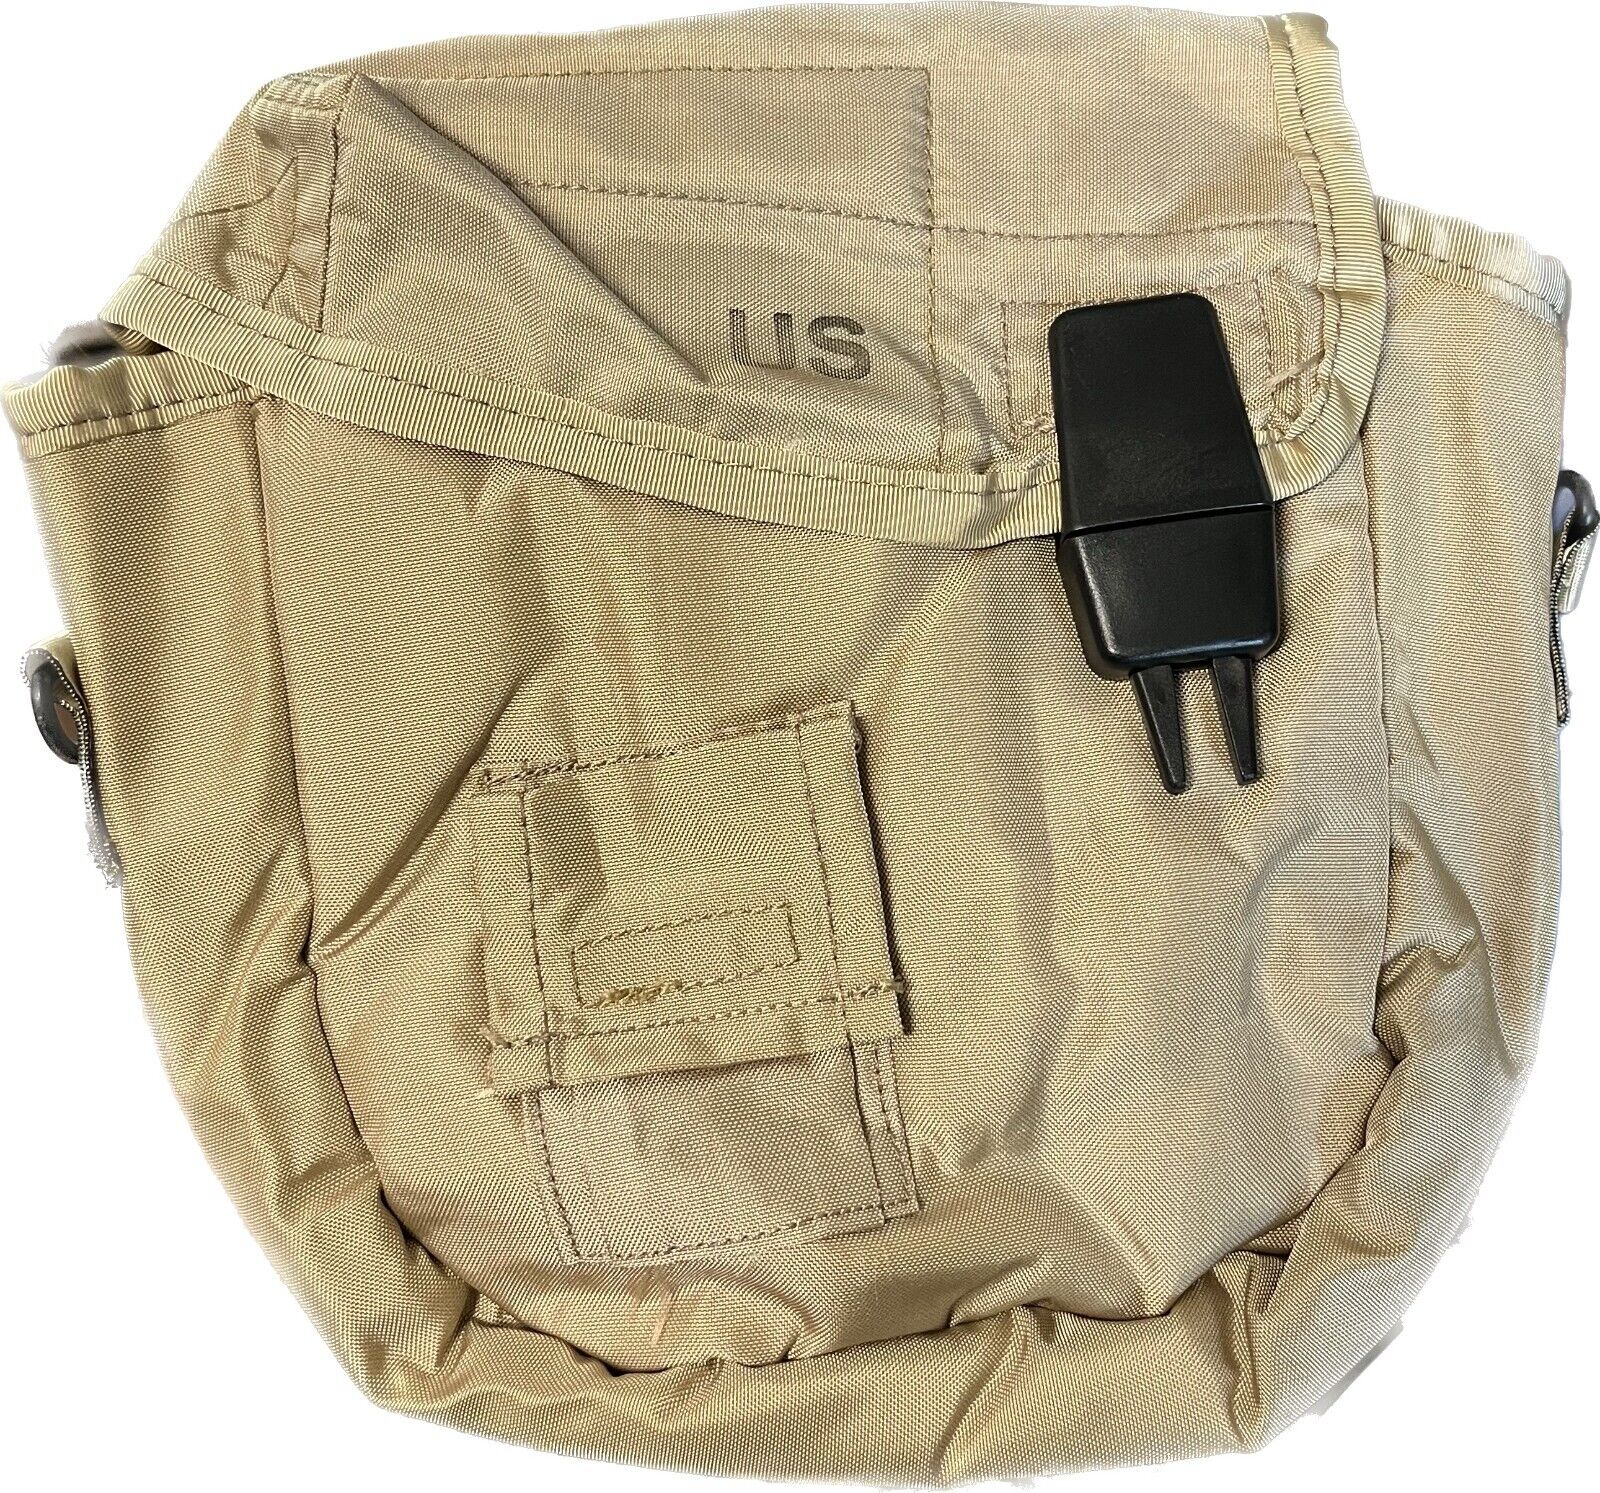 NEW USGI Water Canteen Cover and Strap 2 Quart Cover Desert Tan (Cover Only)